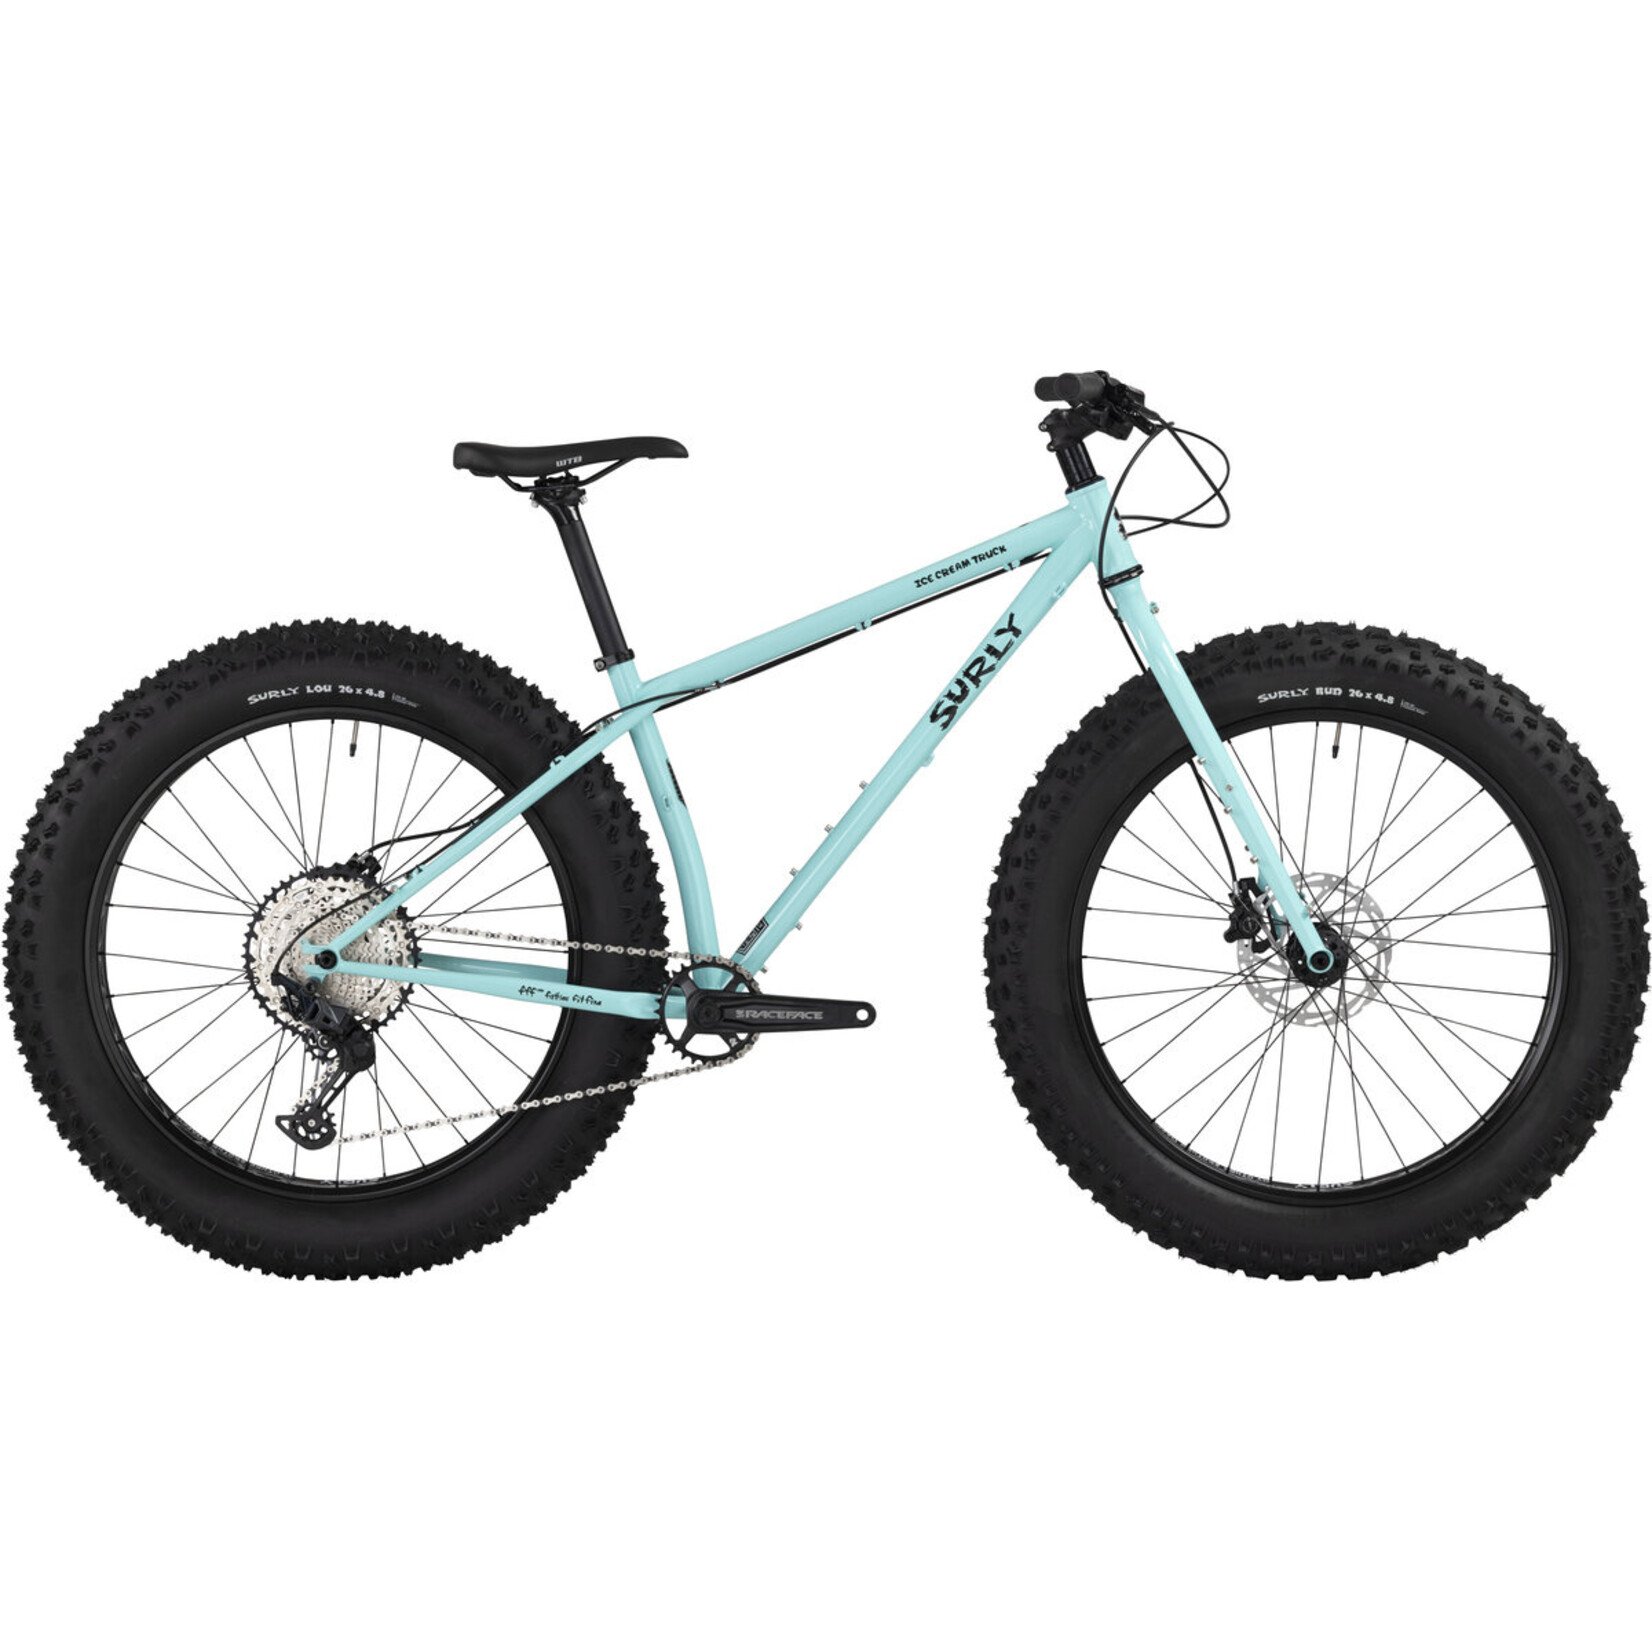 Surly Surly Ice Cream Truck Fat Bike - 26", Steel, Safety Mask Blue, Small